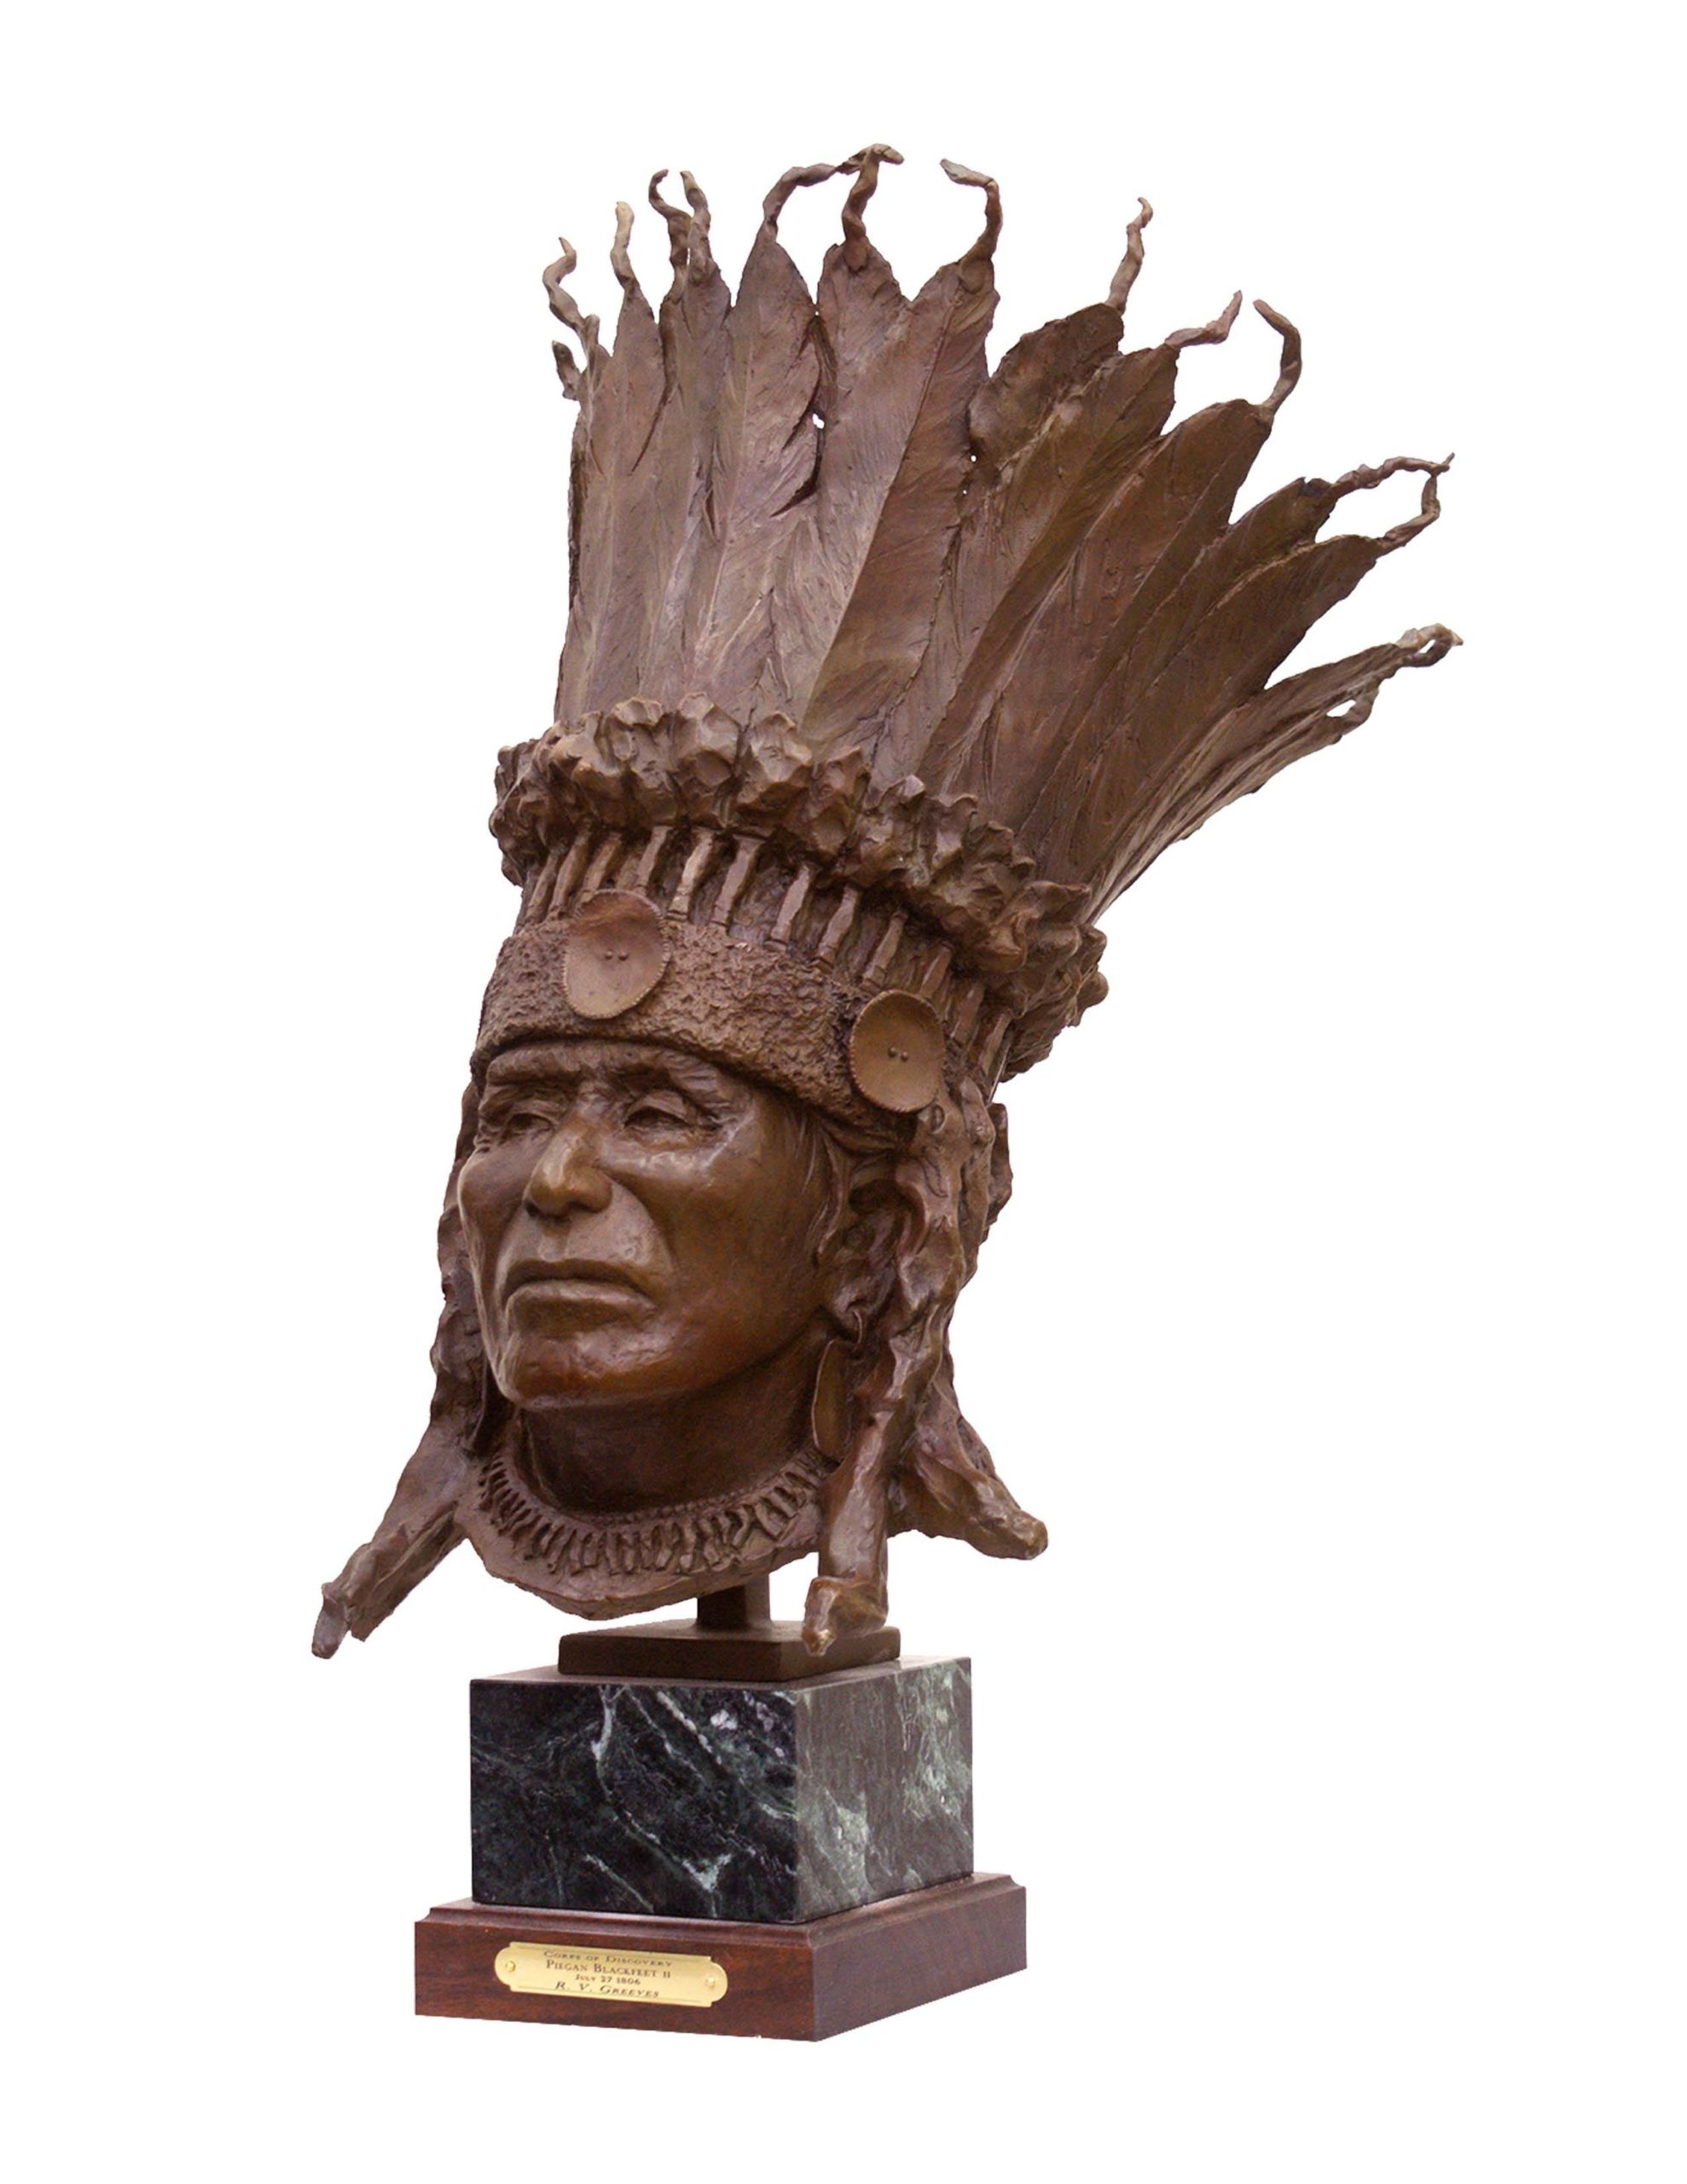 

											Richard V. Greeves </b>

											<em>
												 Lewis & Clark, Corp of Discovery, 1804-1806: The Native Peoples Lewis & Clark Encountered on their Epic Journey</em> 

											<h4>
												August 6 - October 30, 2021											</h4>

		                																																<i>Straight Up Bonnet,</i>  
																																																					bronze, 
																																								26 x 14 x 16 inches 
																								
		                				